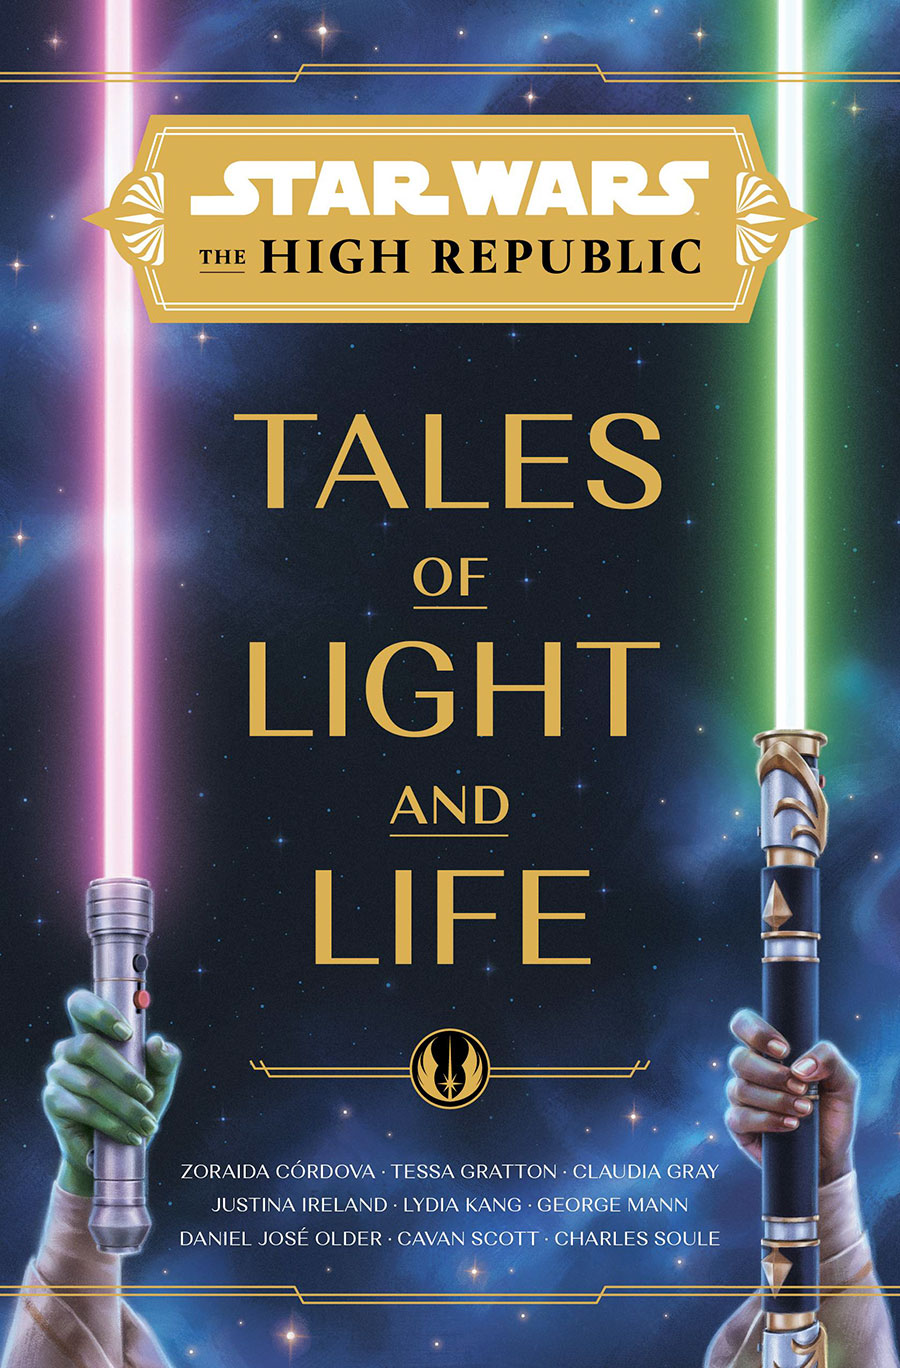 Star Wars The High Republic Tales Of Light And Life Novel HC